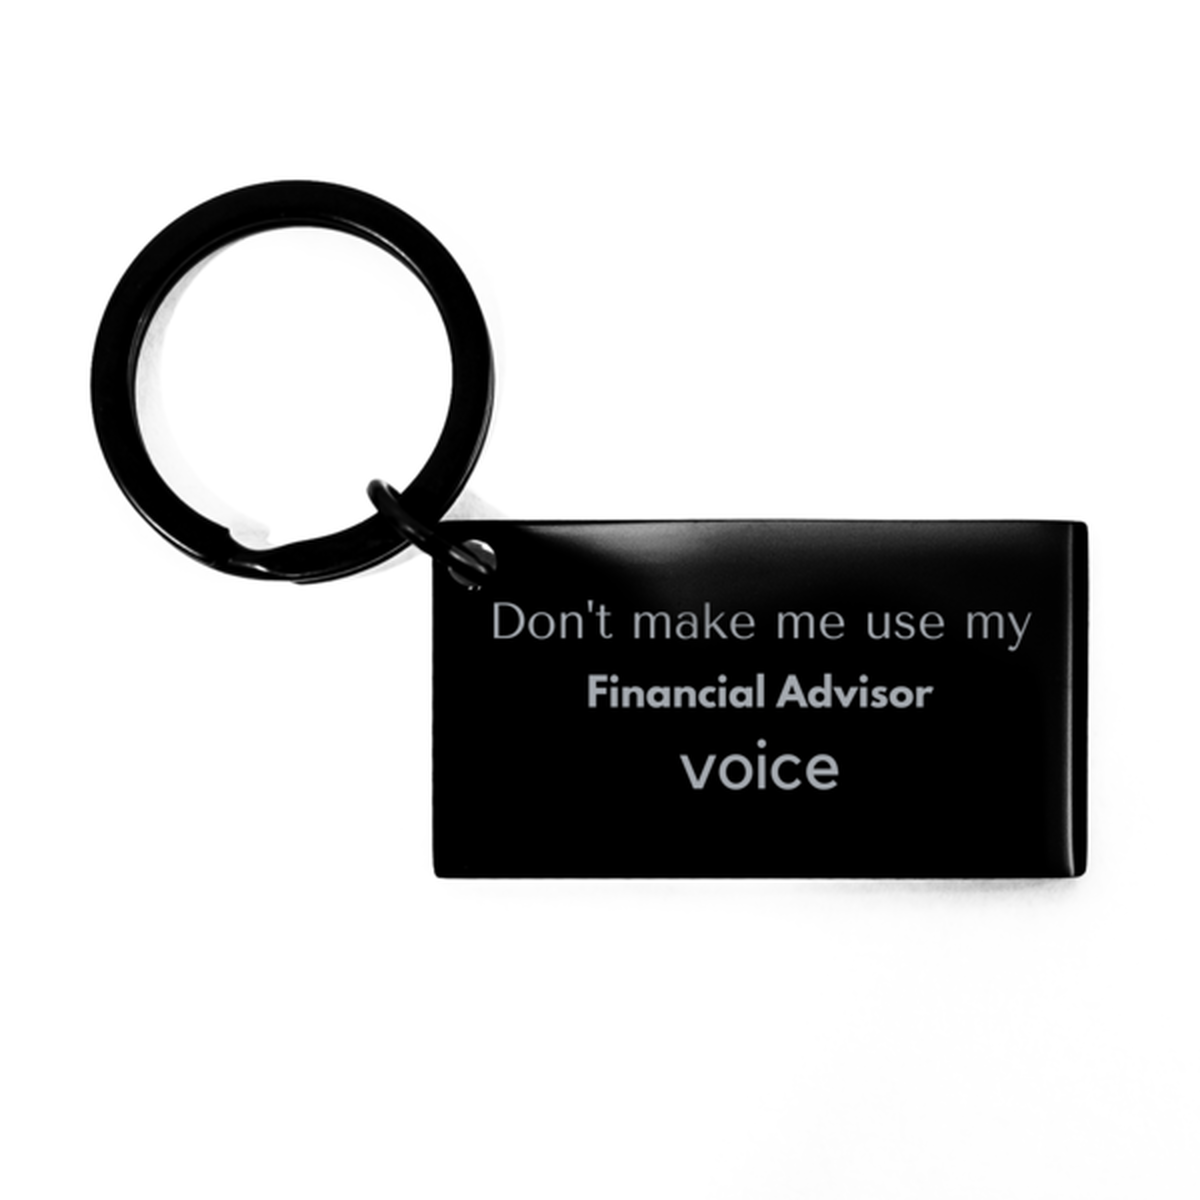 Don't make me use my Financial Advisor voice, Sarcasm Financial Advisor Gifts, Christmas Financial Advisor Keychain Birthday Unique Gifts For Financial Advisor Coworkers, Men, Women, Colleague, Friends